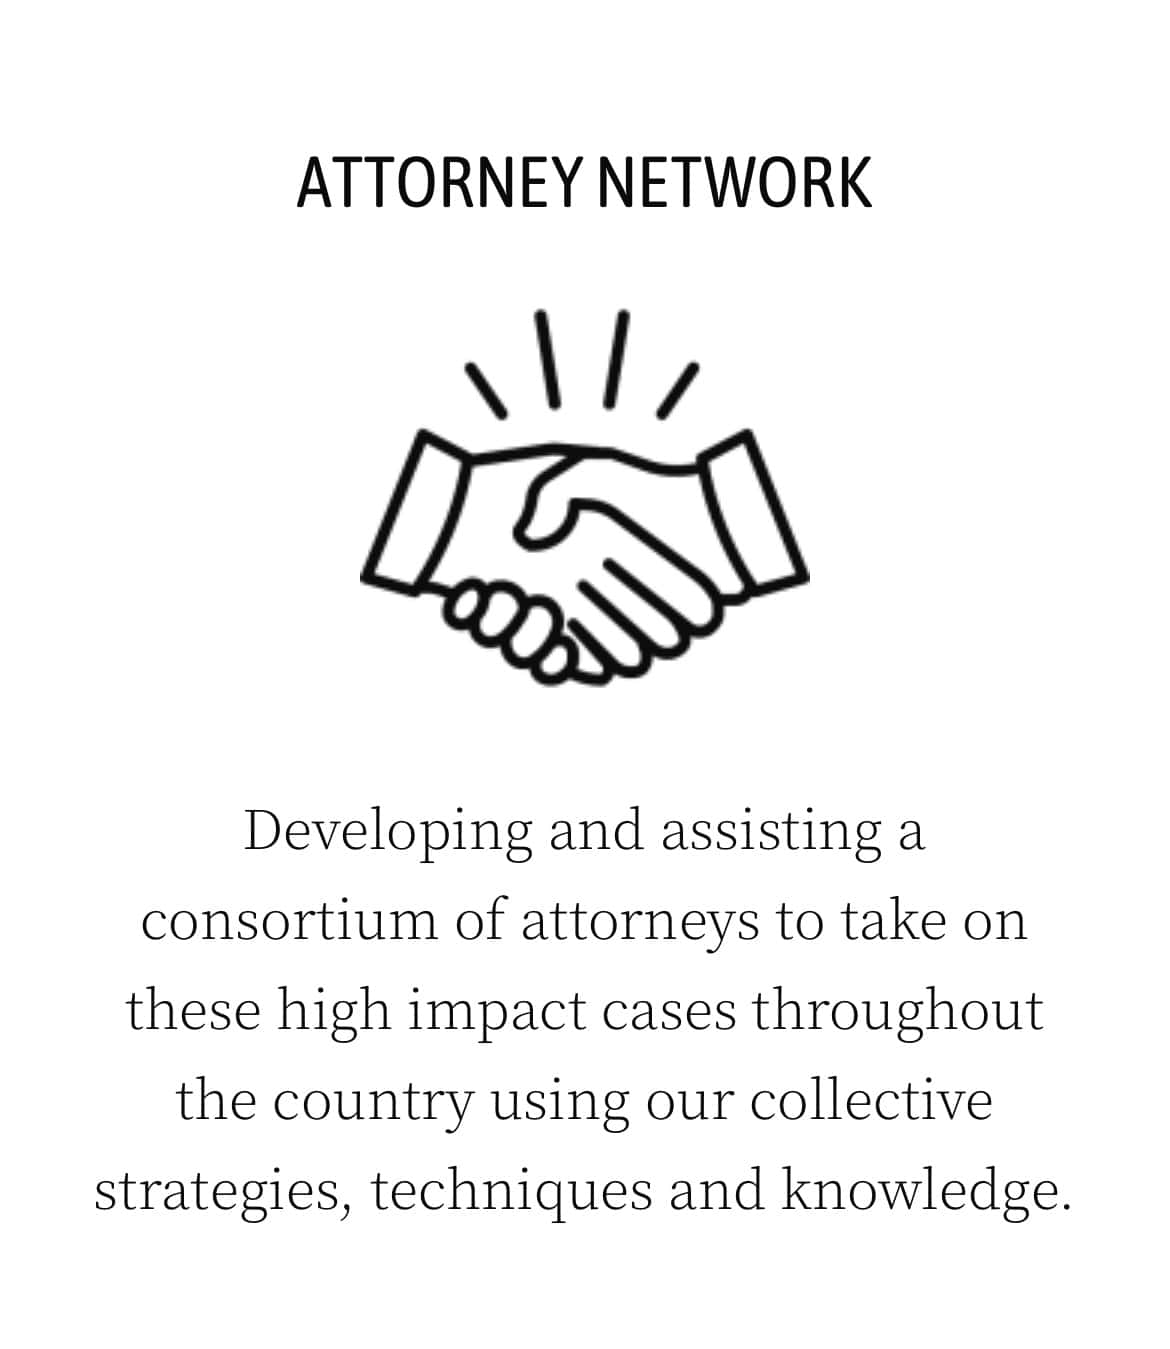 ALF partners with The Center for Animal Litigation, joining Network of Attorneys